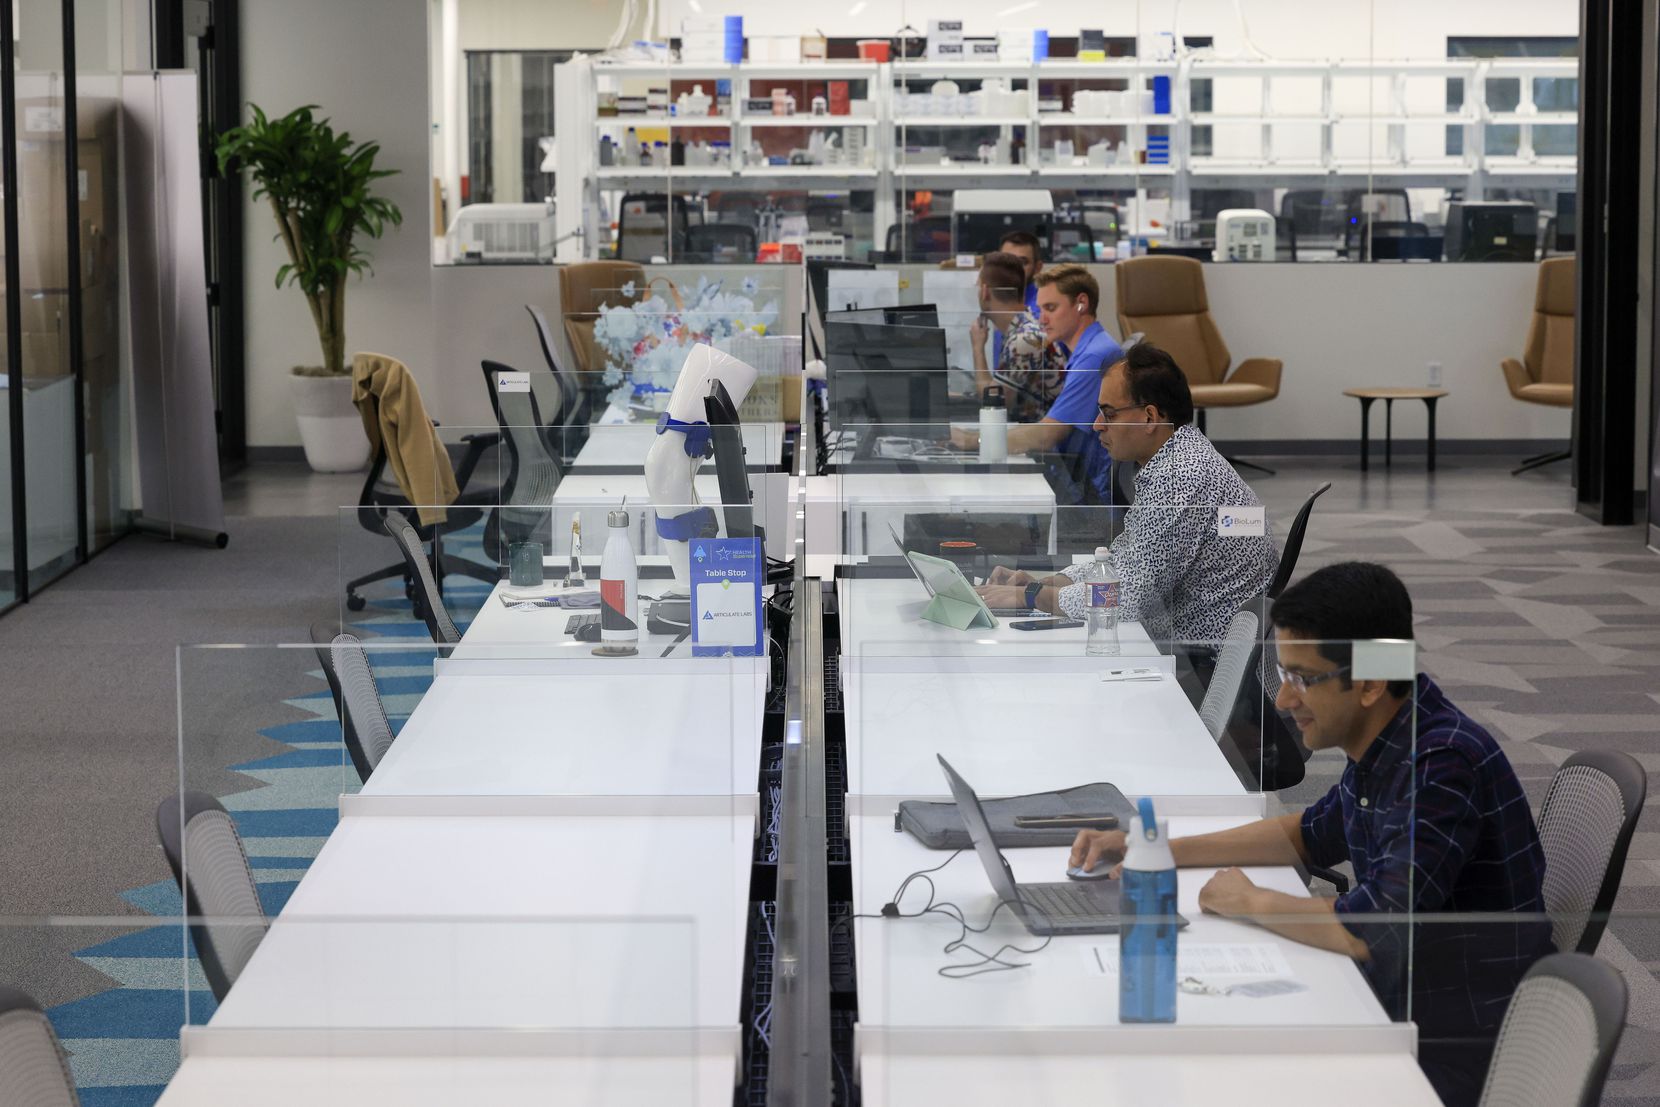 People work at desks at BioLabs co-working space in Dallas, Wednesday, July 6, 2022.